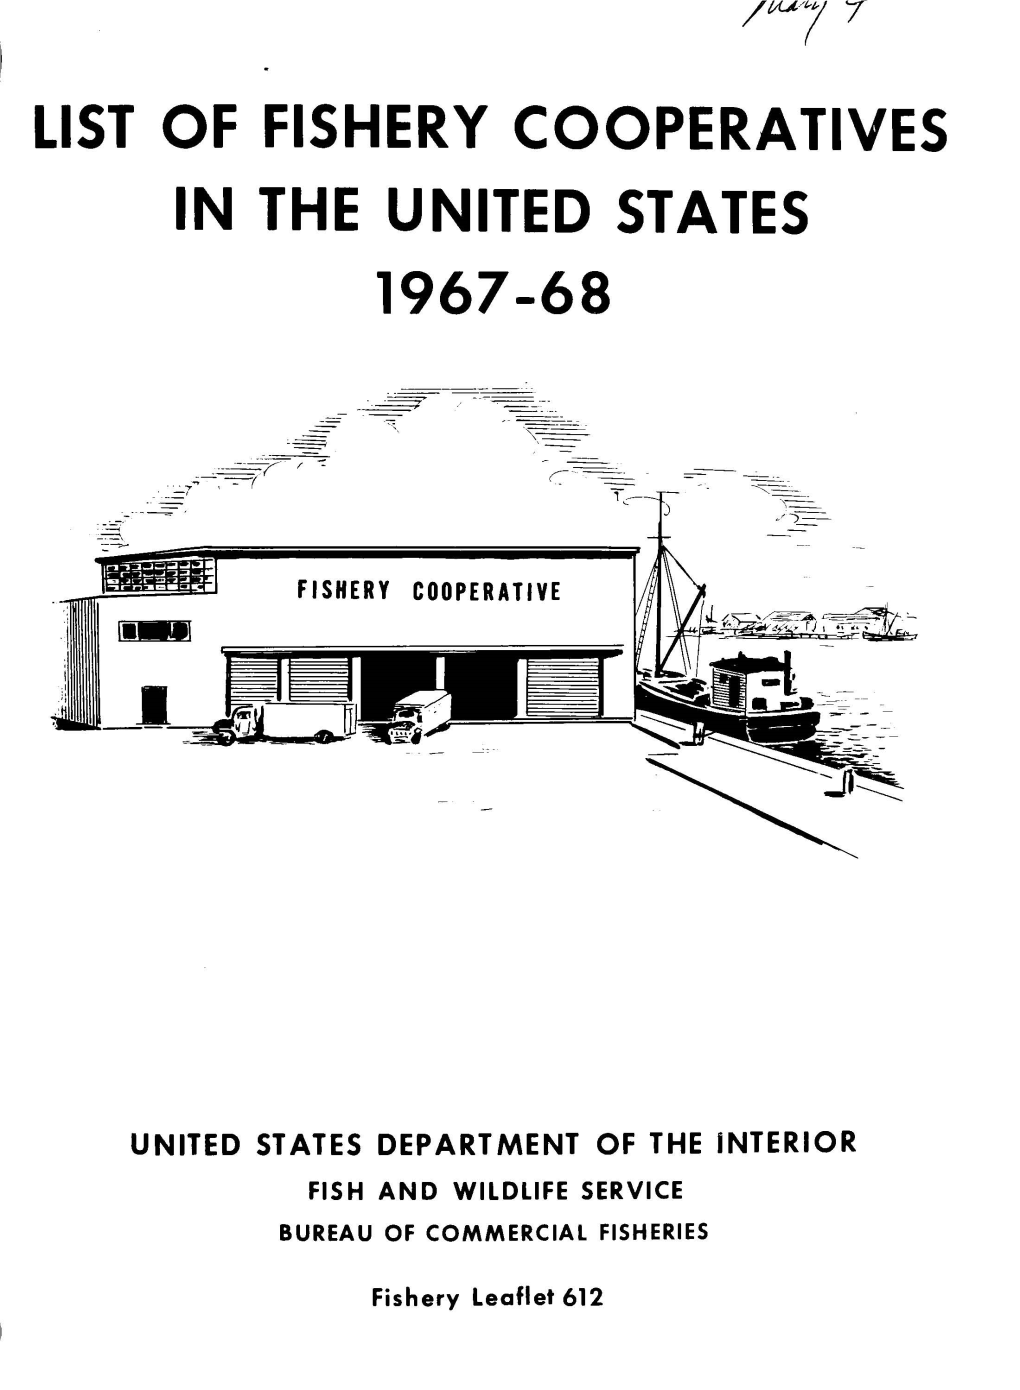 List of Fishery Cooperatives in the United States 1967 -68